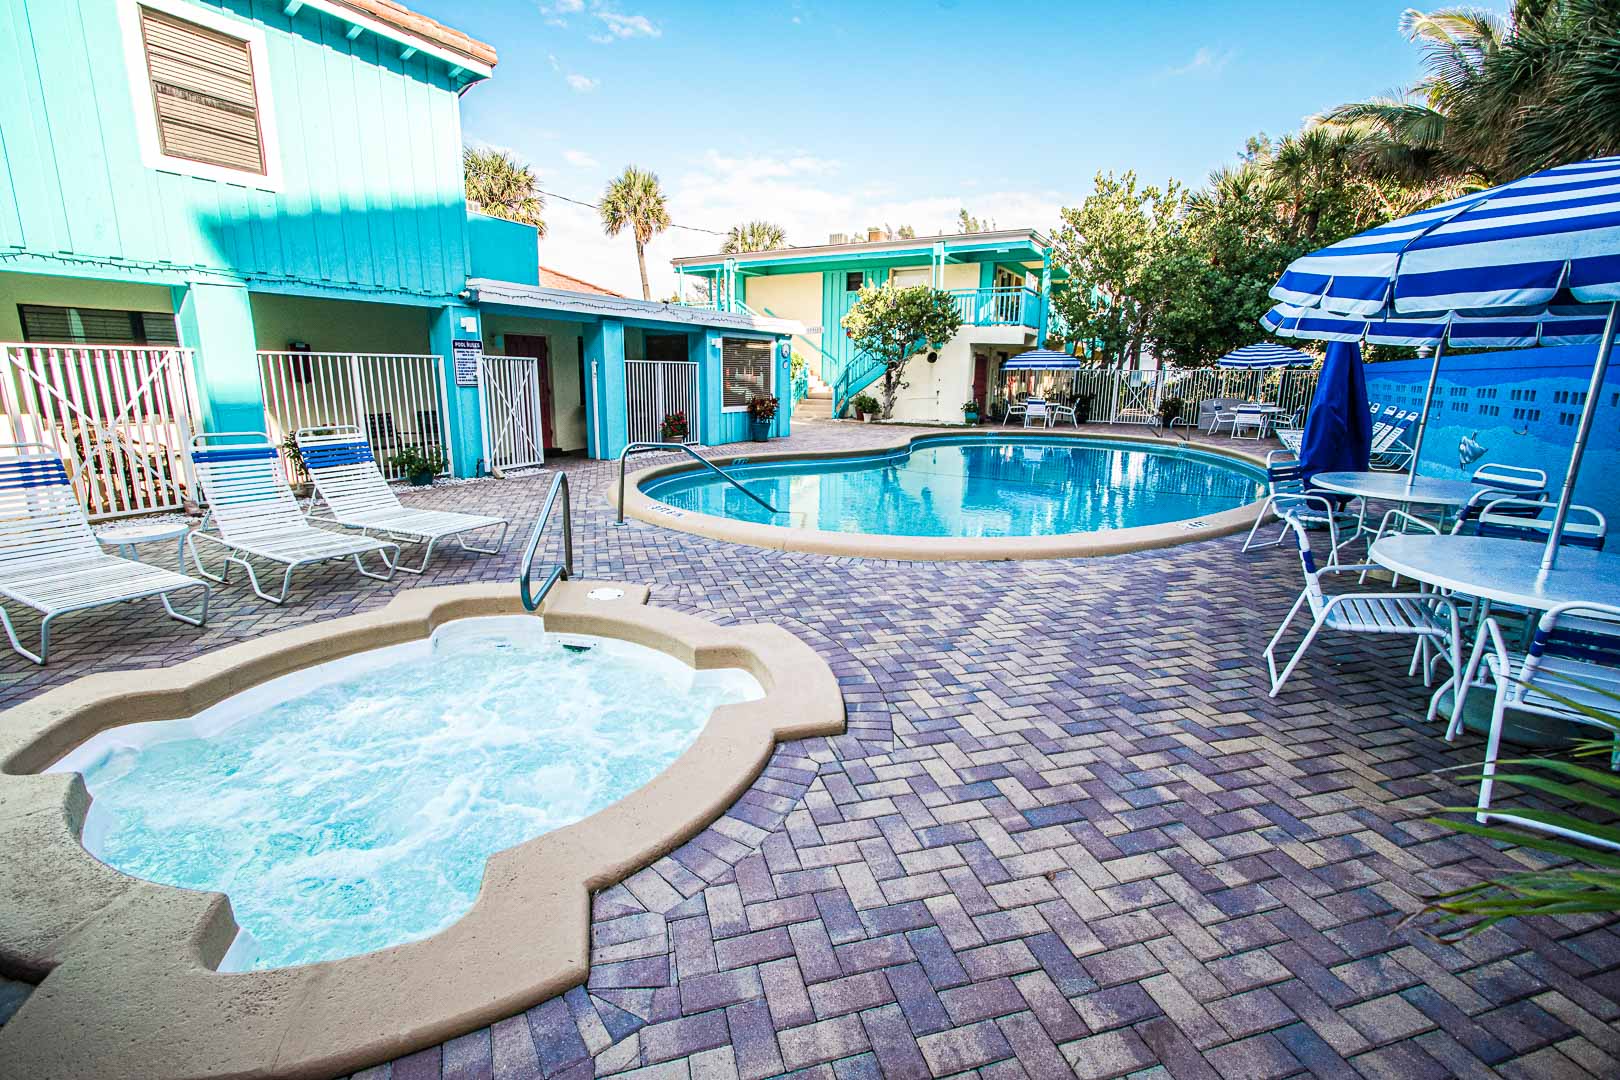 A colorful outdoor swimming pool and jacuzzi at VRI's Sand Dune Shores in Florida.